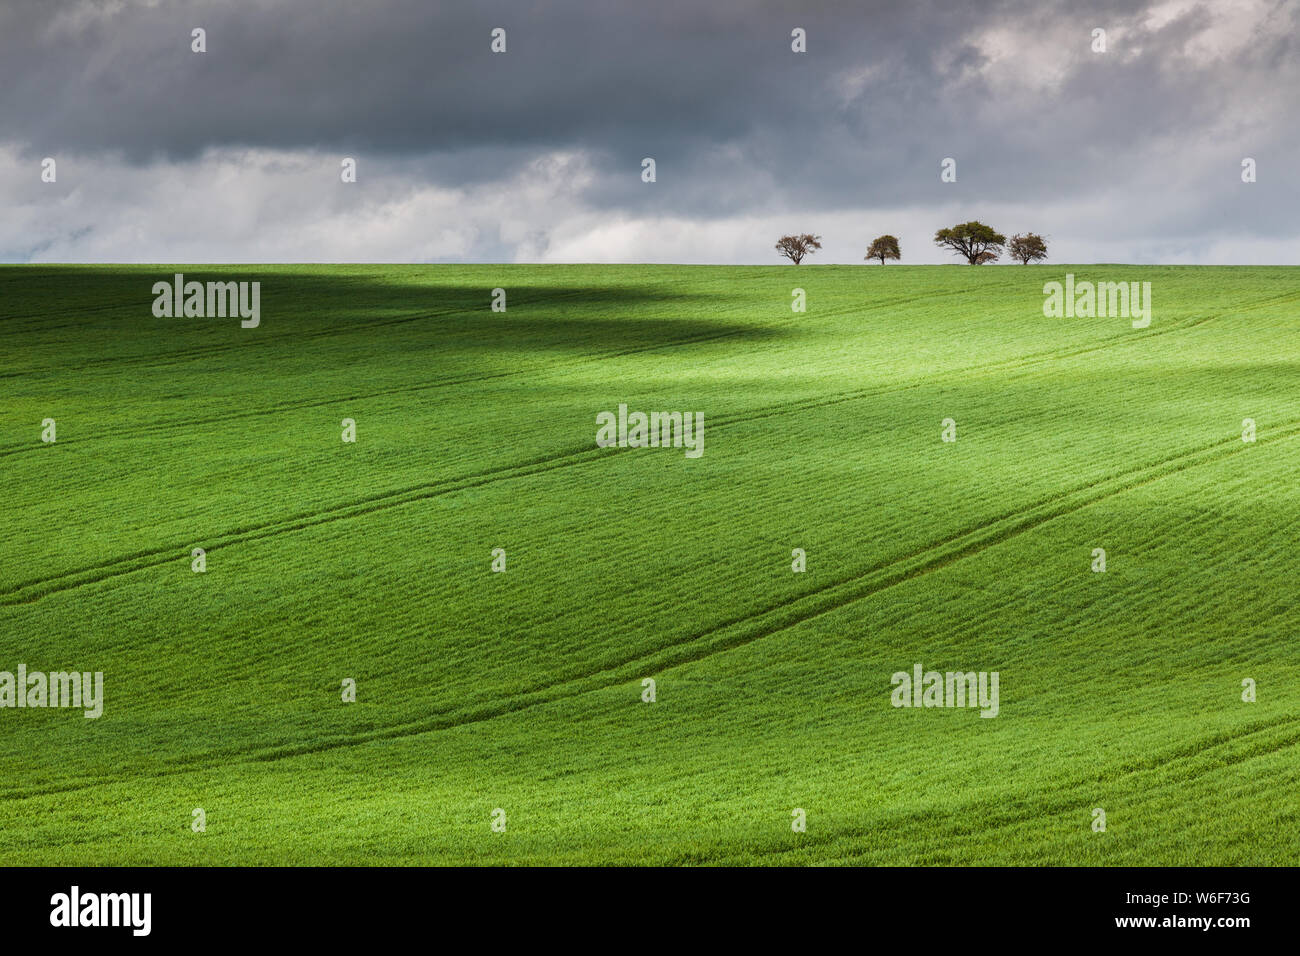 Green sloping crop field with trees on the horizon. Stock Photo